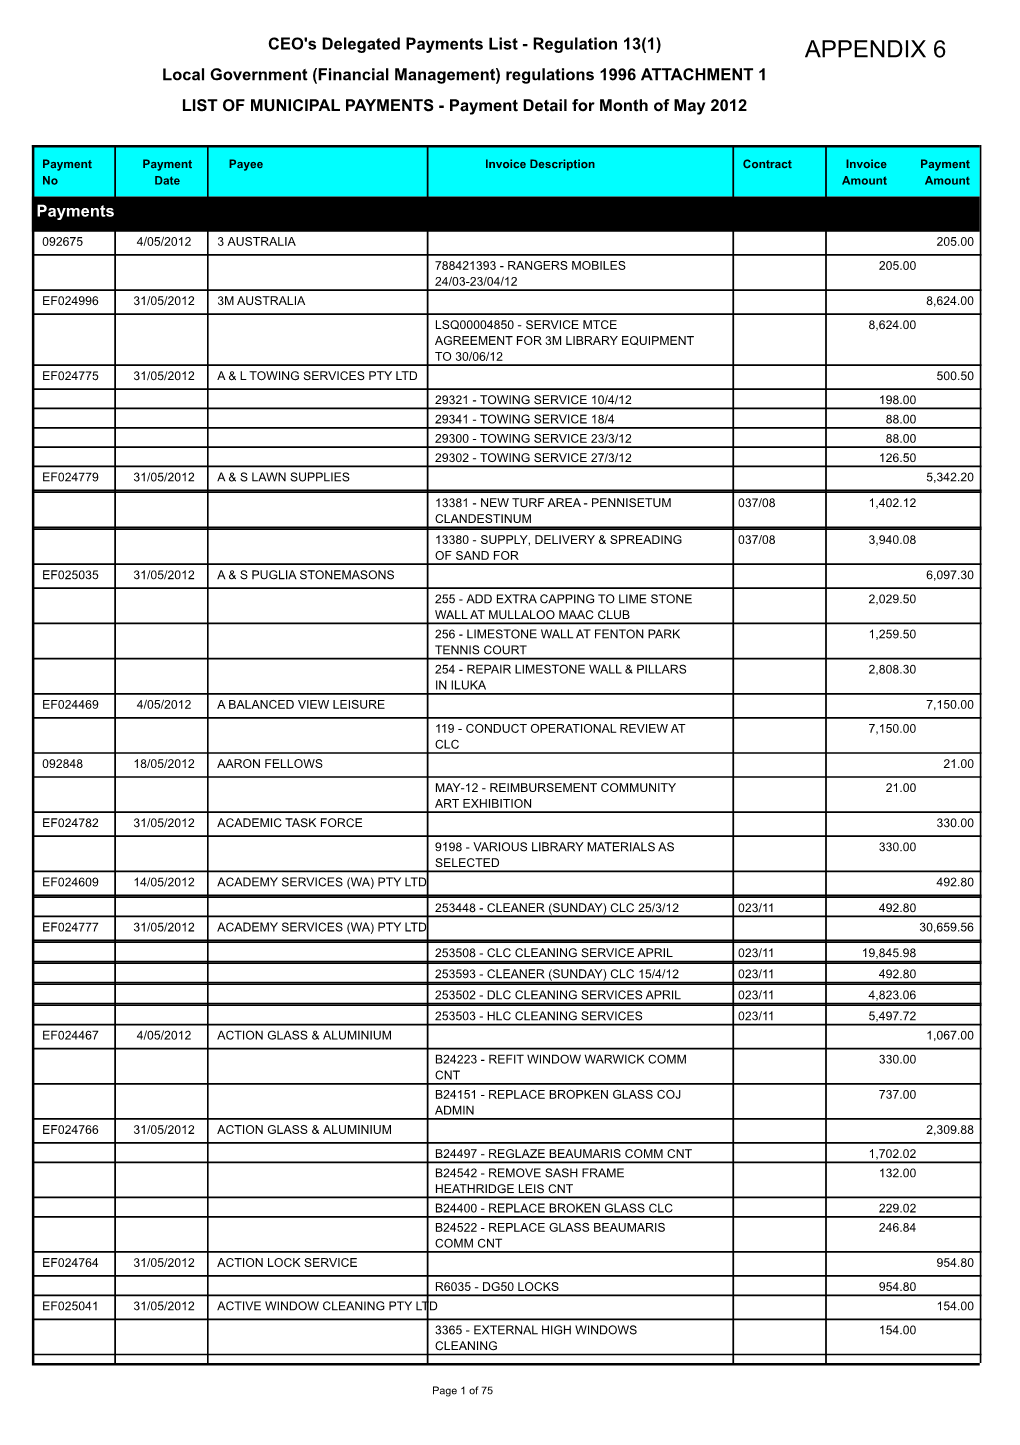 APPENDIX 6 Local Government (Financial Management) Regulations 1996 ATTACHMENT 1 LIST of MUNICIPAL PAYMENTS - Payment Detail for Month of May 2012